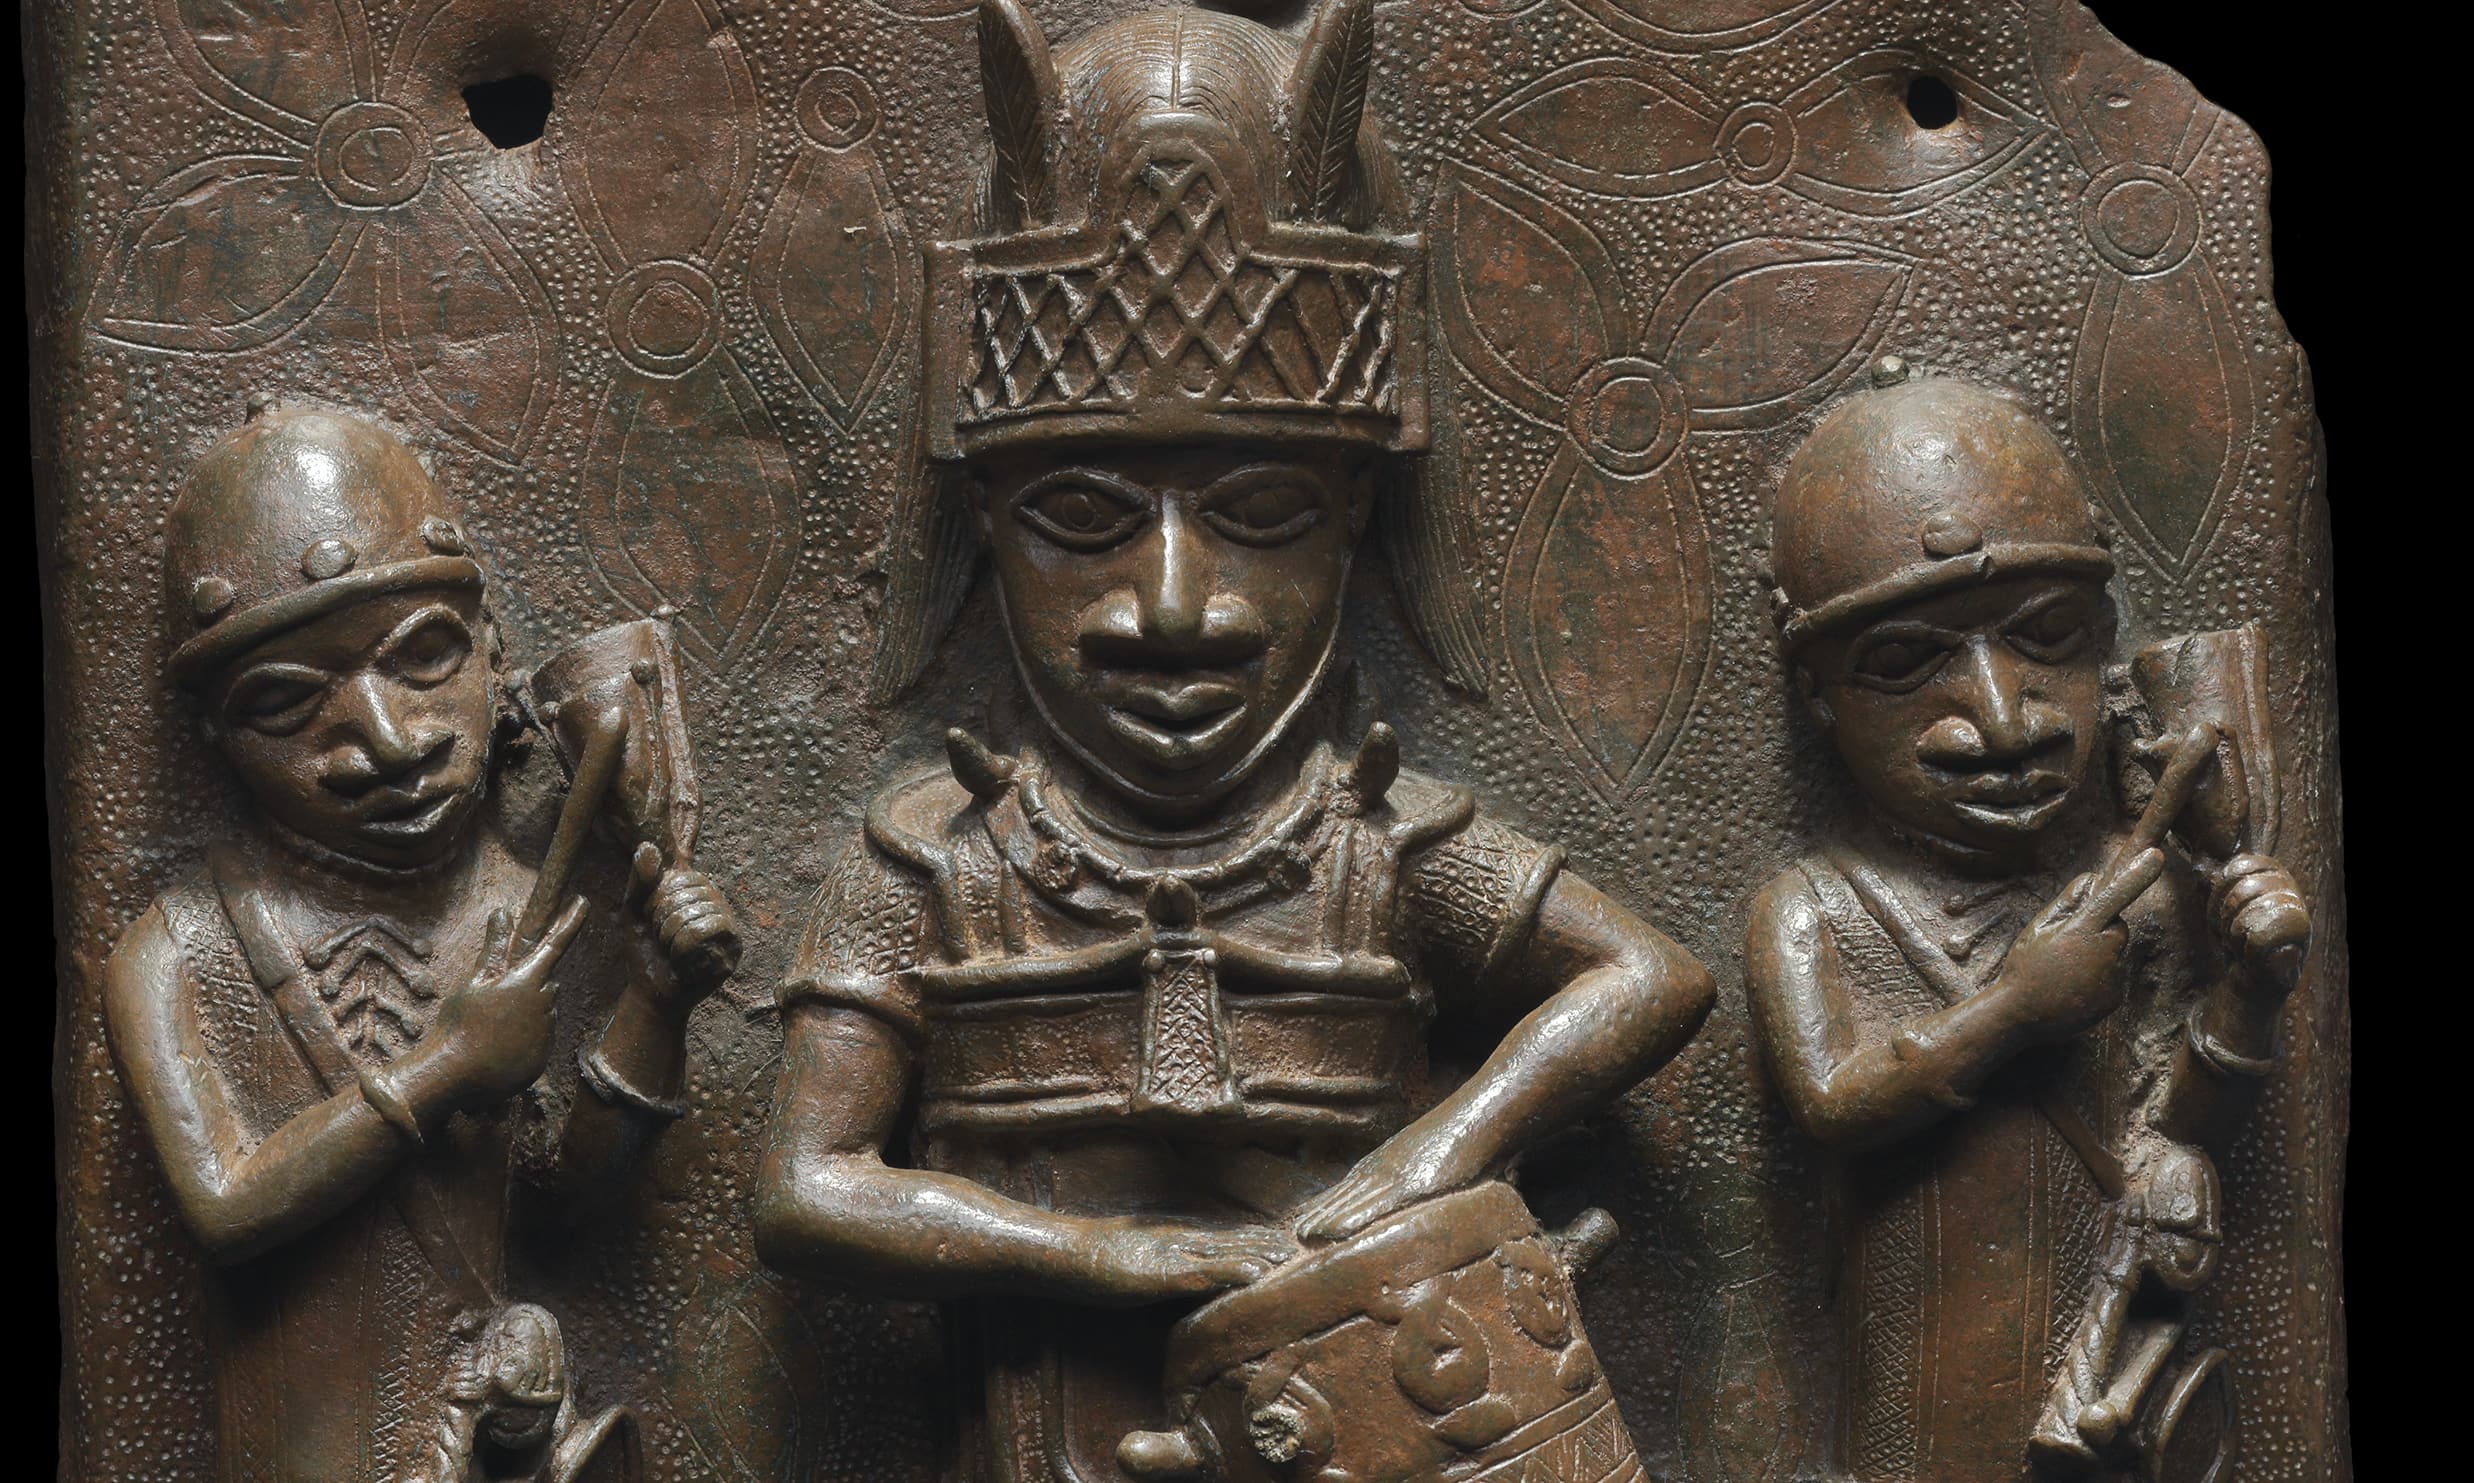 Artist Unidentified, Relief plaque showing a dignitary with drum and two attendants striking gongs, c. 1530-1570, copper alloy (Robert Owen Lehman Collection, Courtesy Museum of Fine Arts, Boston)